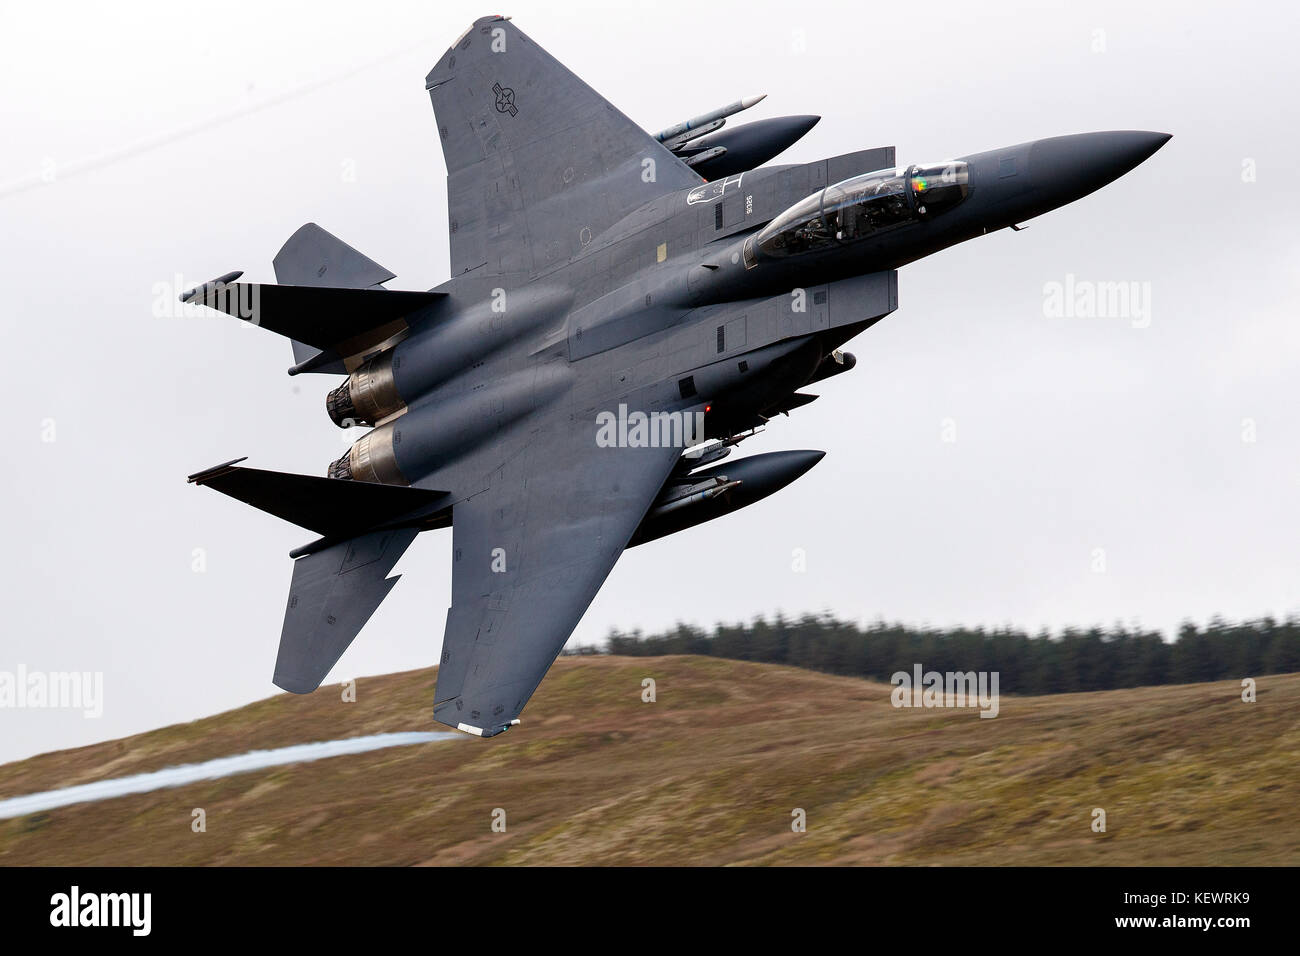 United States Air Force McDonnell-Douglas F-15E Strike Eagle (LN 91-326) from the 48th Fighter Wing, 494th Fighter Squadron based at RAF Lakenheath, England, flies low level through the Mach Loop, Machynlleth, Wales, United Kingdom Stock Photo